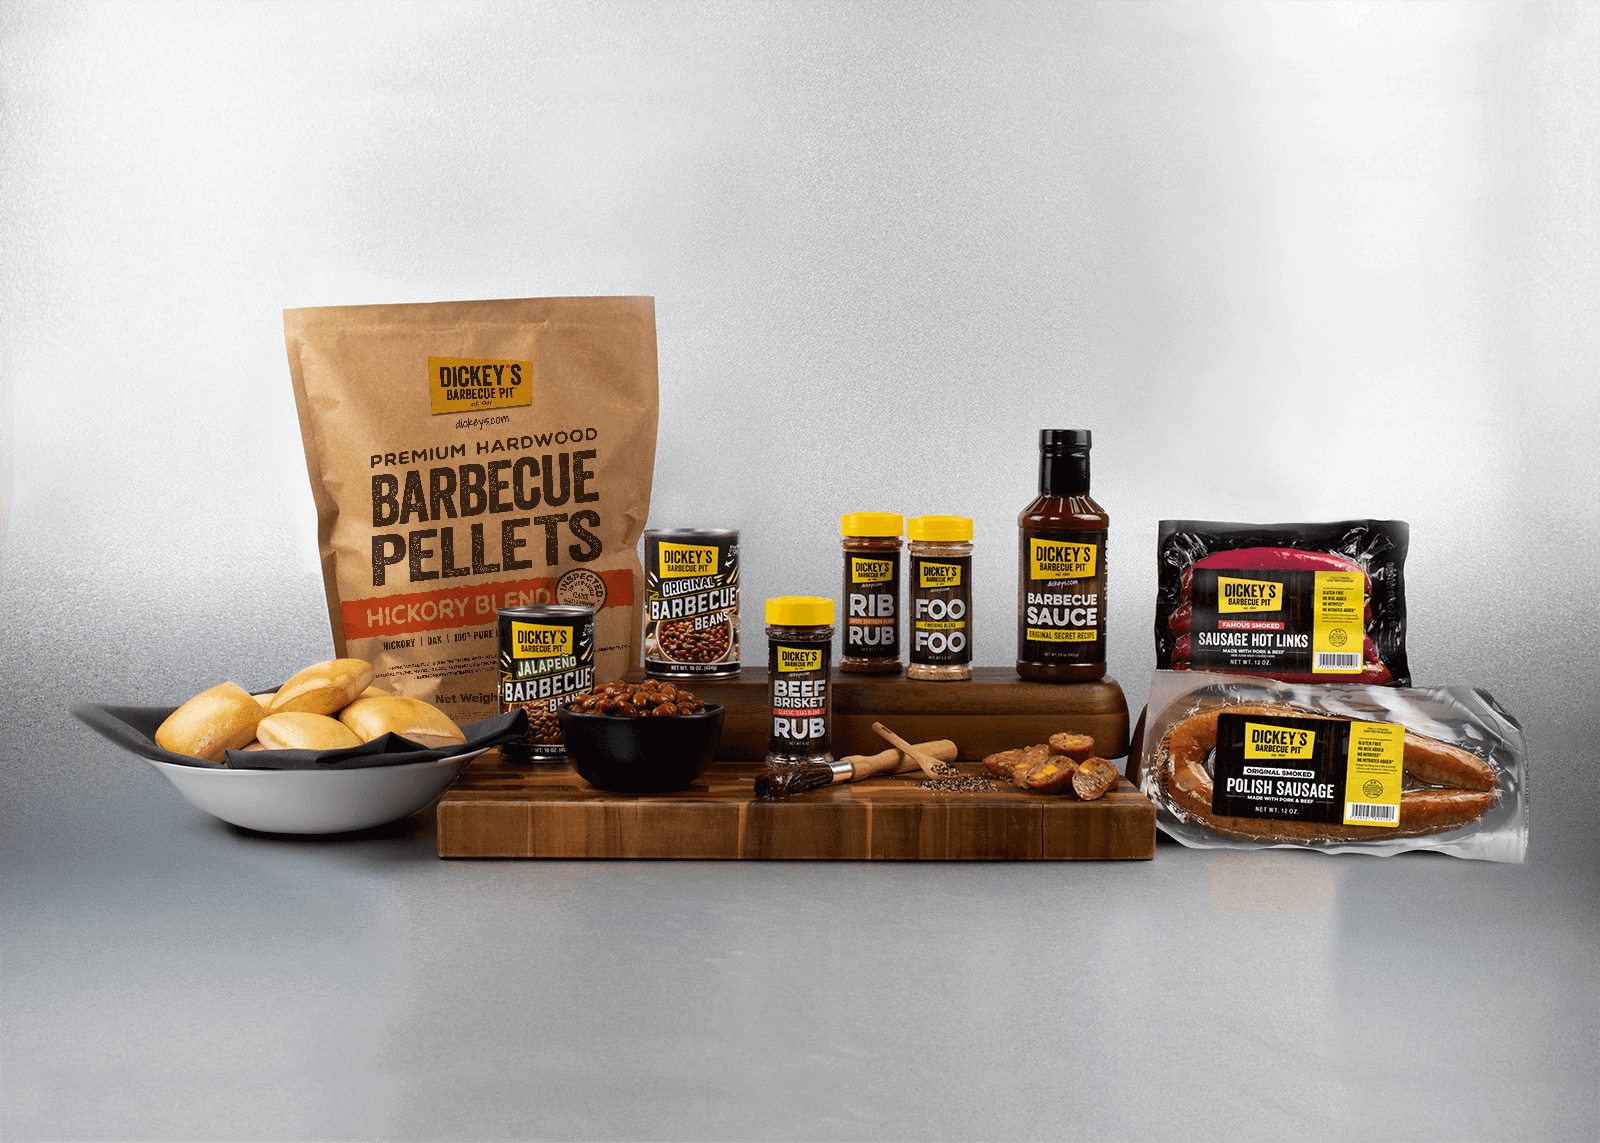 Dickey’s Barbecue Pit Launches Full Line of Rubs, Seasonings and More for the Everyday Pit Master